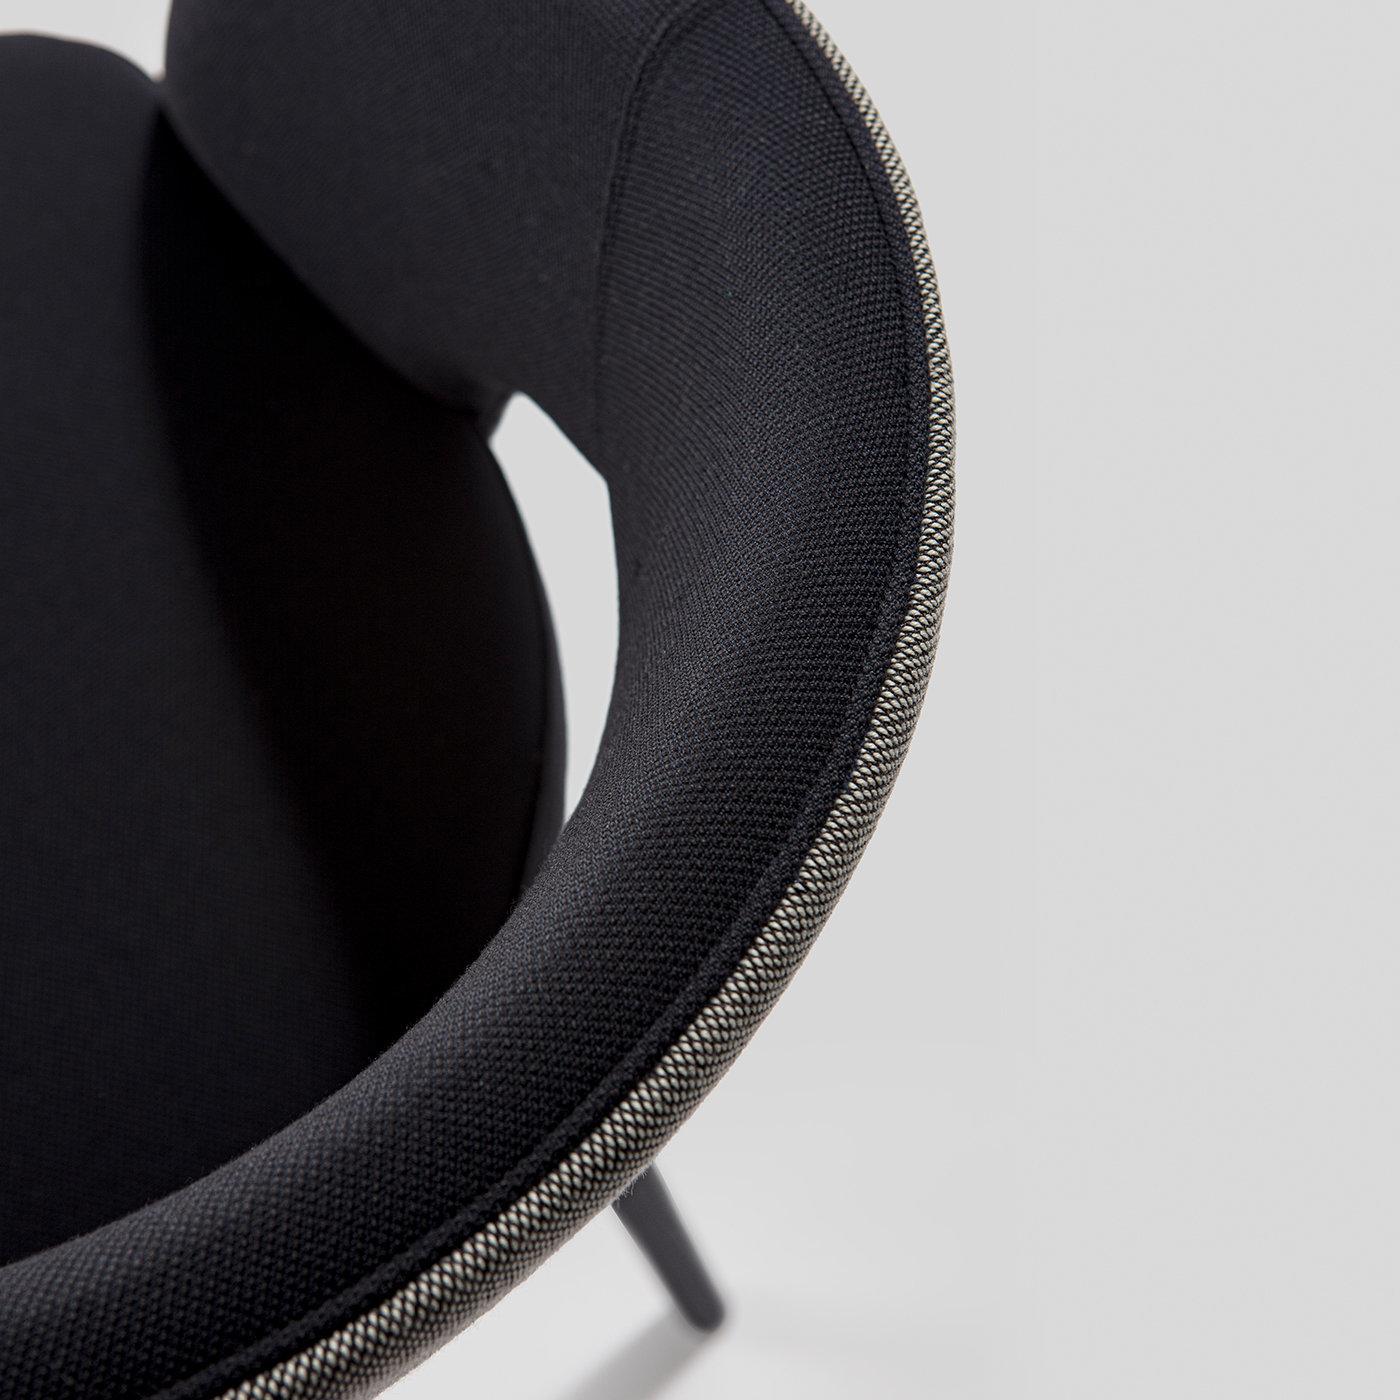 Design meets durability in this mid-century-inspired dining armchair that will be a dramatic and luxurious addition to both a dining room and office decor. The tailored styling is versatile and inviting, featuring a plush anthracite gray upholstery